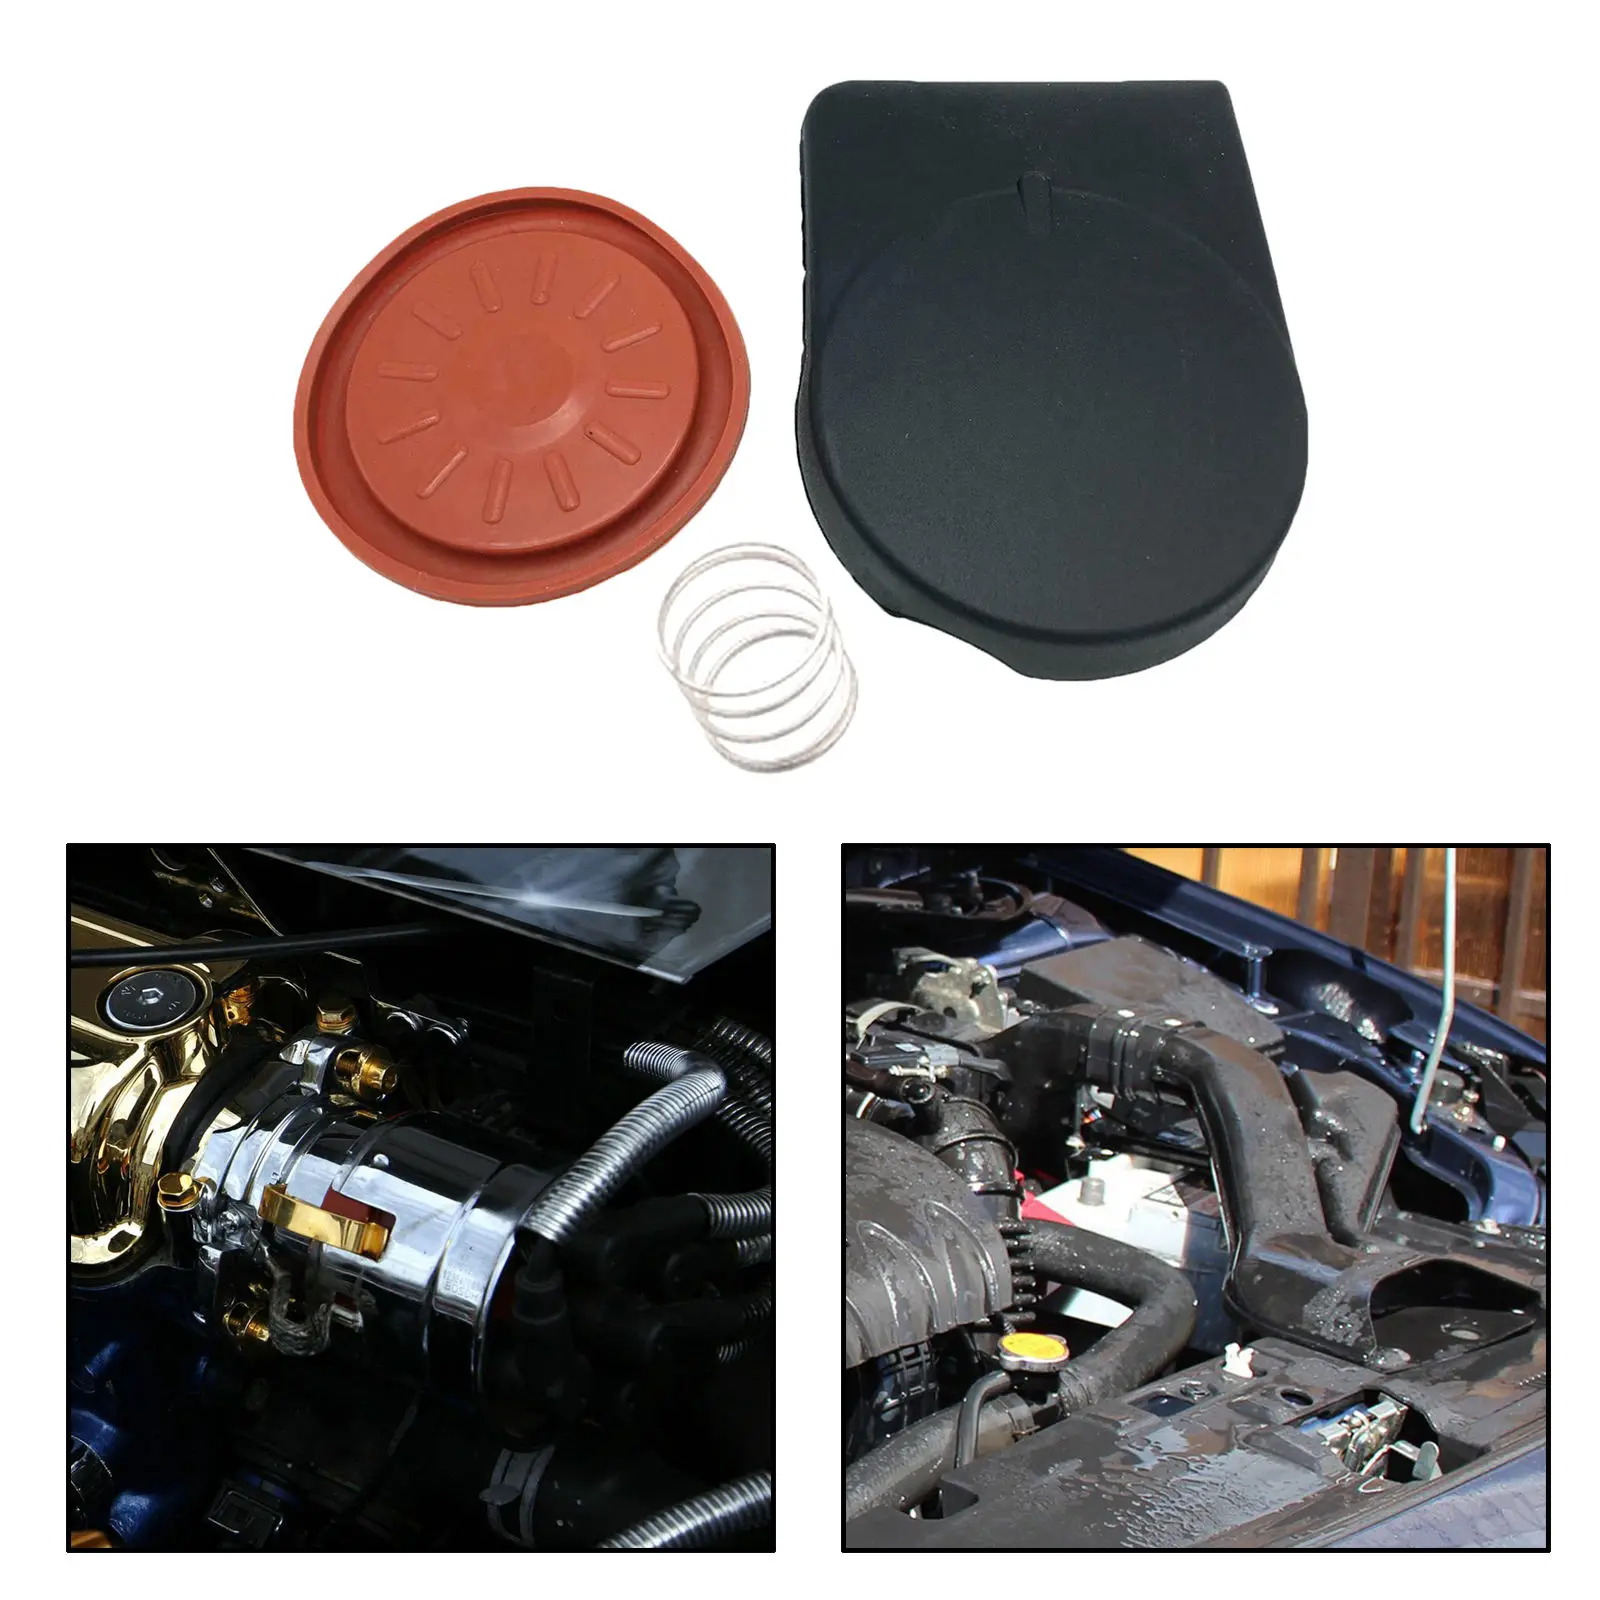 Cylinder Head Valve Cover Kit Valve Cover with Membrane Car Engine Valve Cover Gasket Plastic Fit for  R55 Parts